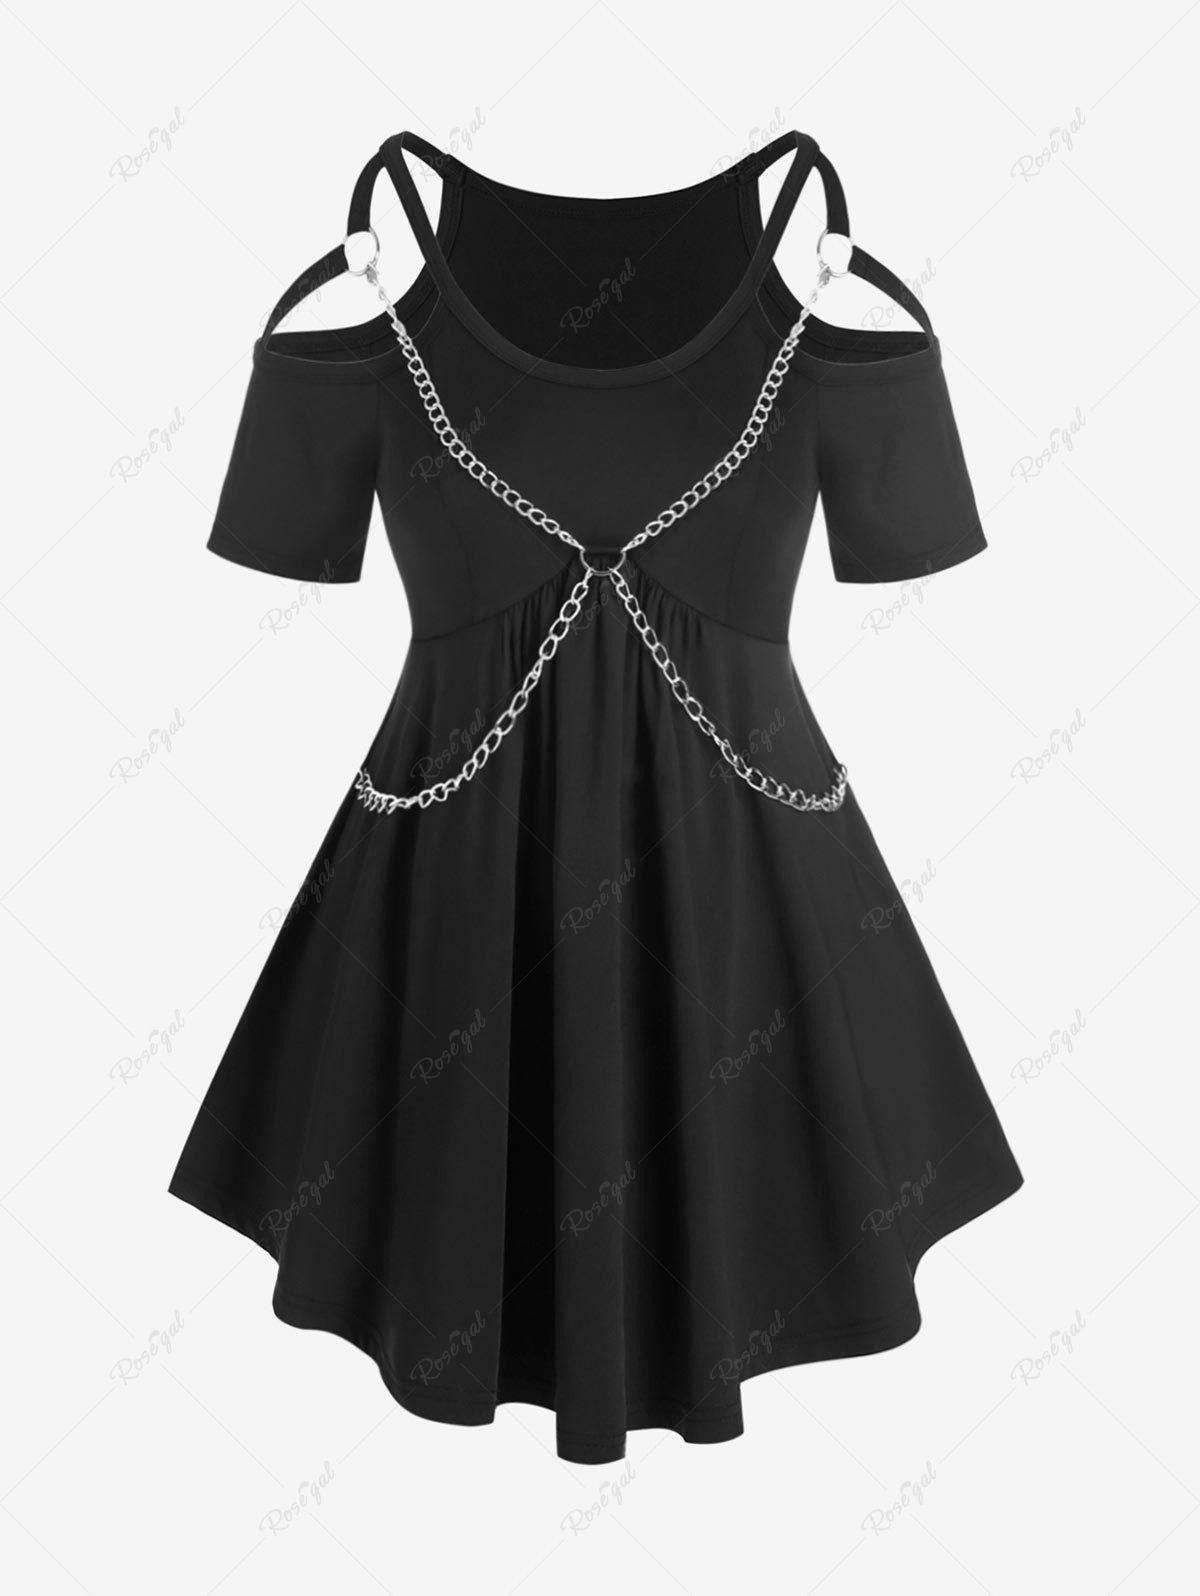 Hot Plus Size Solid Cold Shoulder Harness Chains Gothic T Shirt  